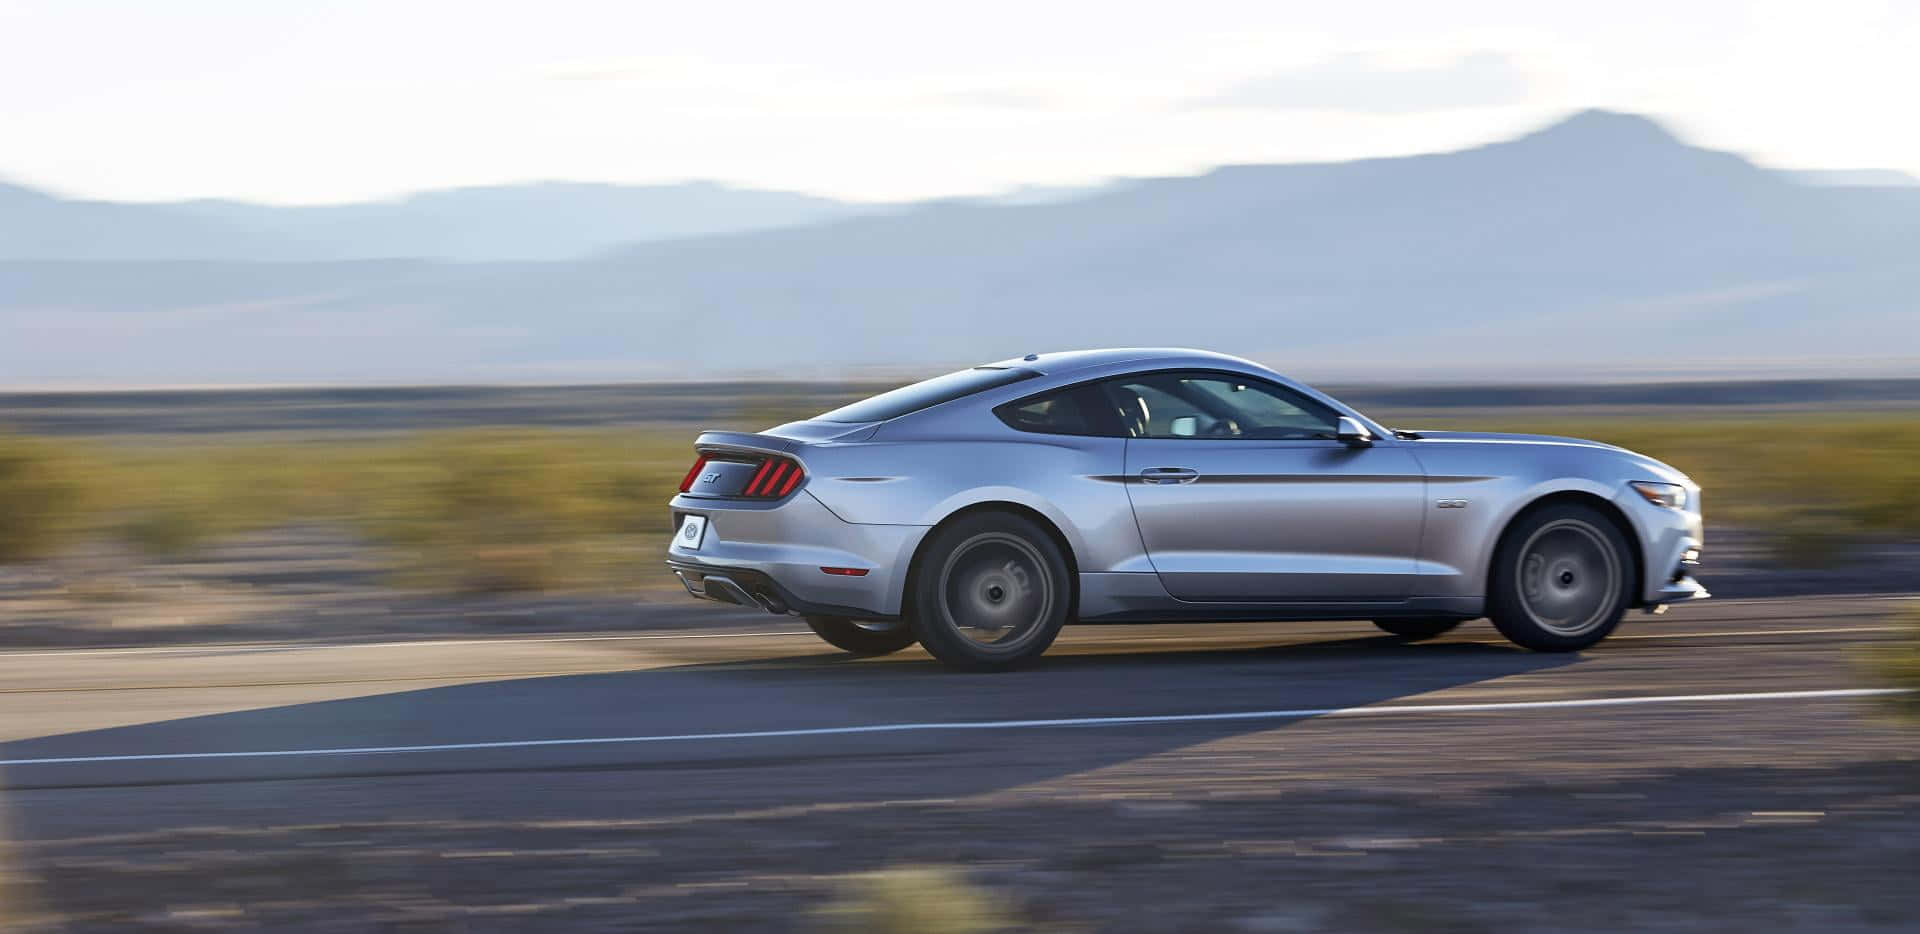 Stunning Ford Mustang California Special cruising on an open road Wallpaper